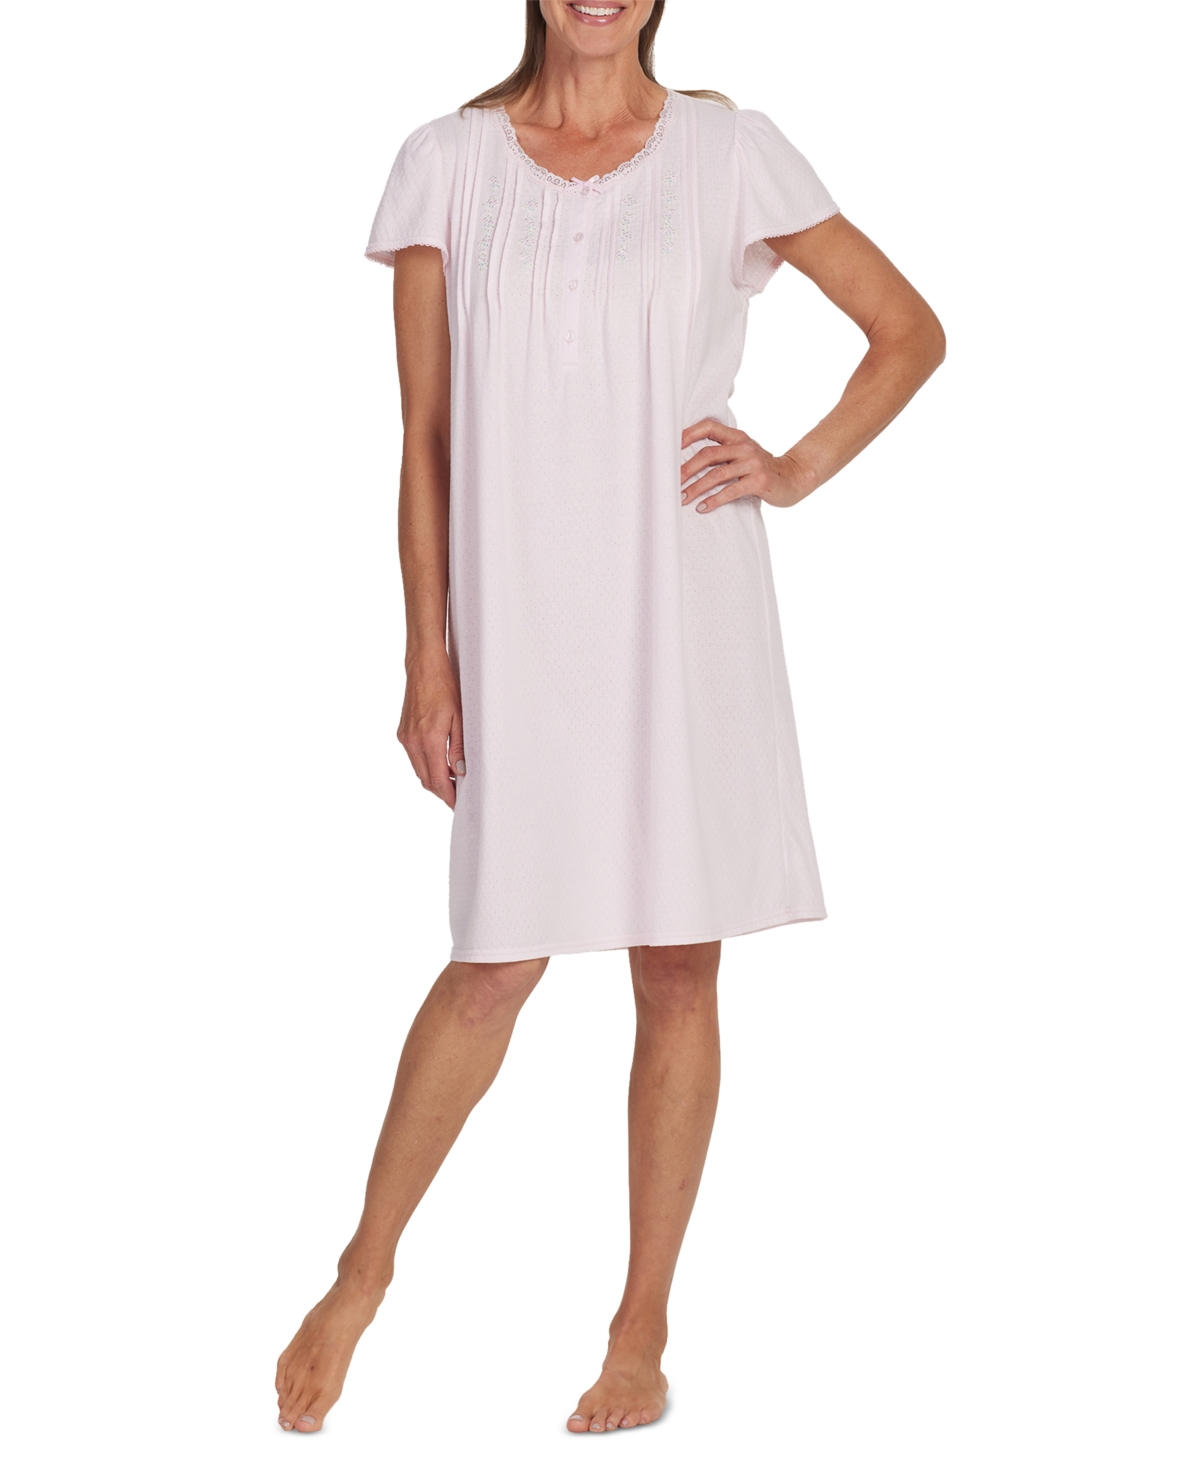 Women's Short-Sleeve Lace-Trim Nightgown - Pink